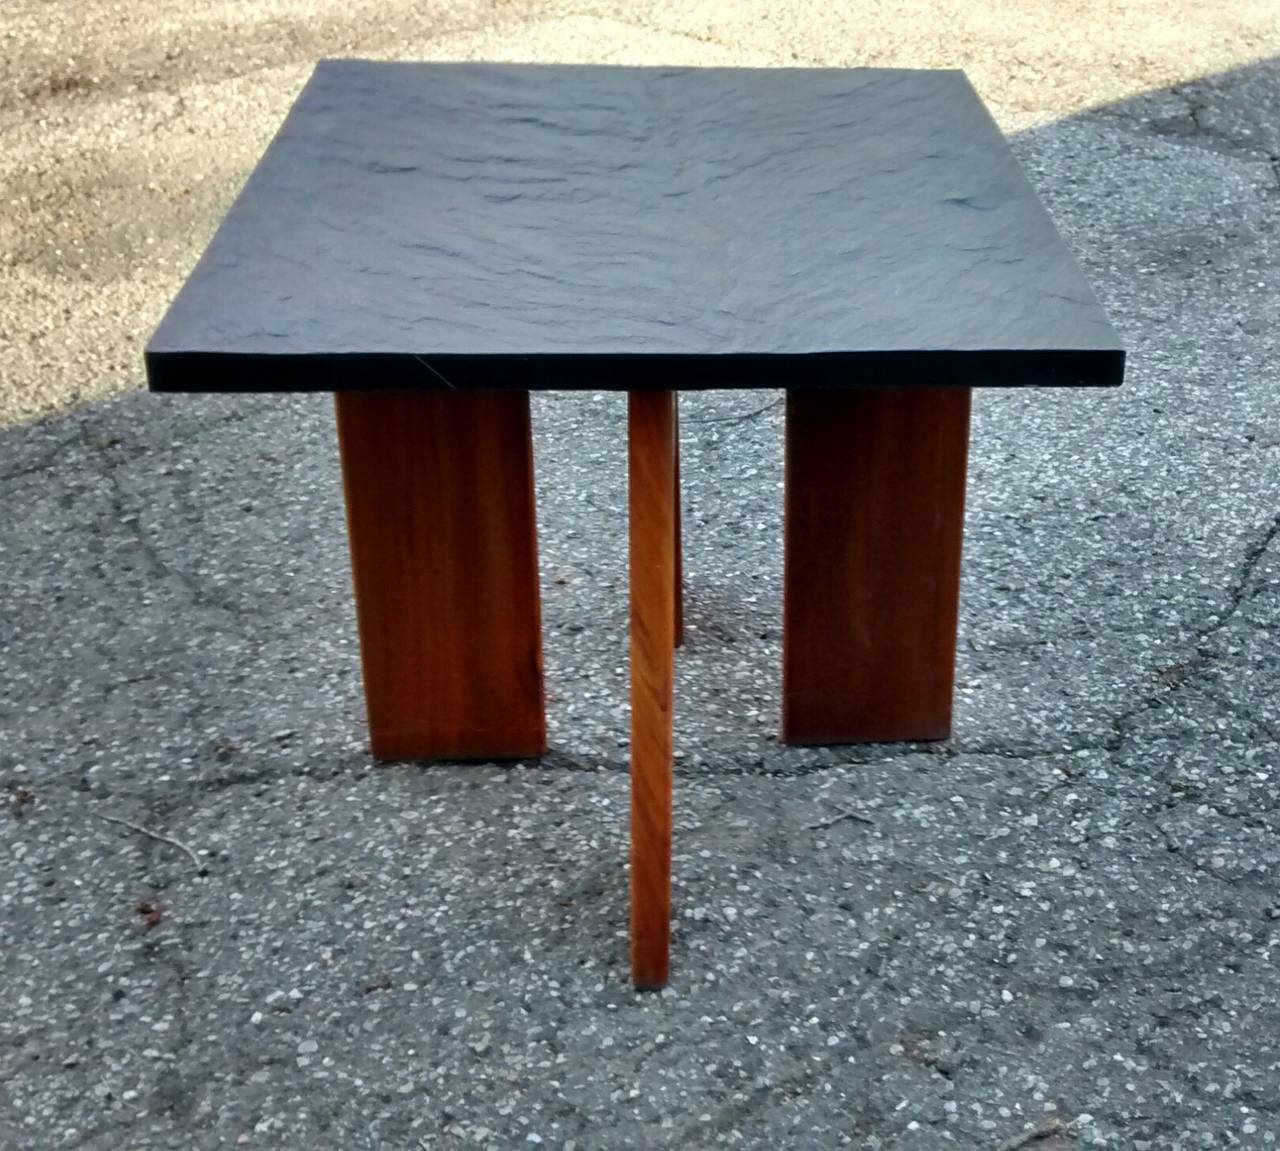 Fantastic recent estate find is this pair of Adrian Pearsall designed end tables for Craft Associates, dating to about 1970. 

Rendered in a flat, oil finished walnut with heavy duty black slate tops, this pair are in remarkable condition, and